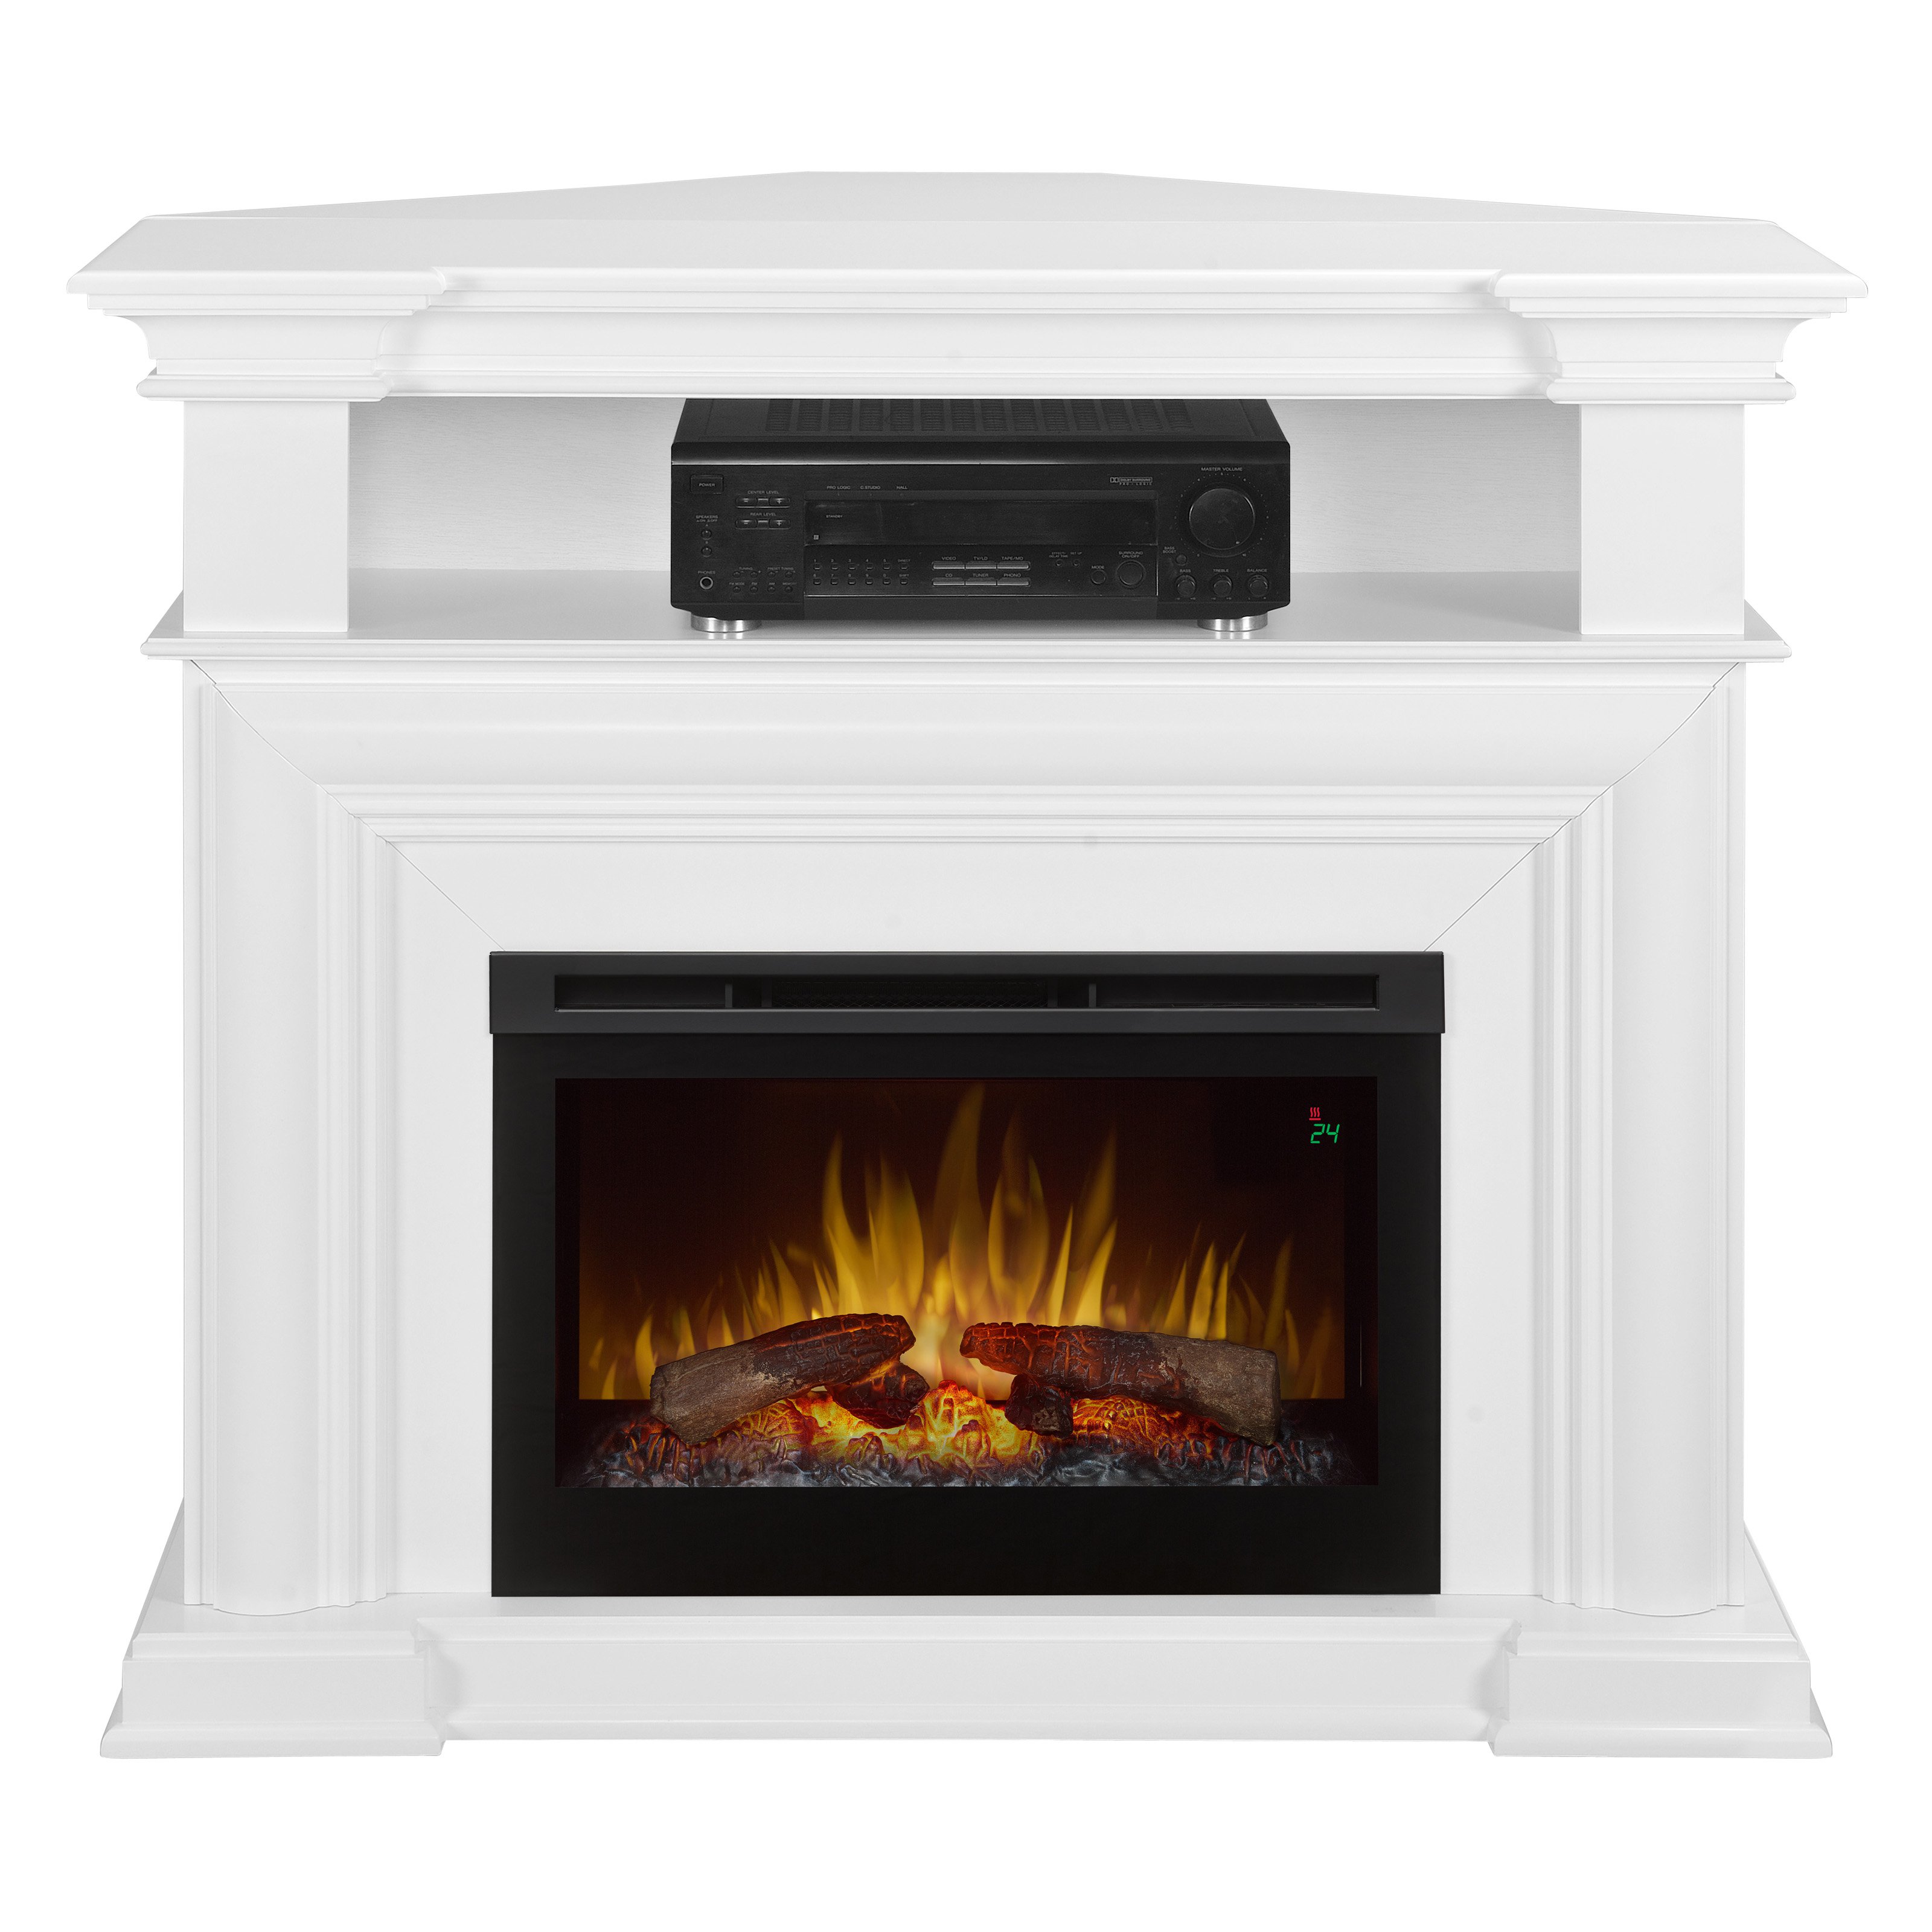 Cheap Electric Fireplaces Clearance Unique Electric Fireplace with Convertible Corner Option and Drop Down Front